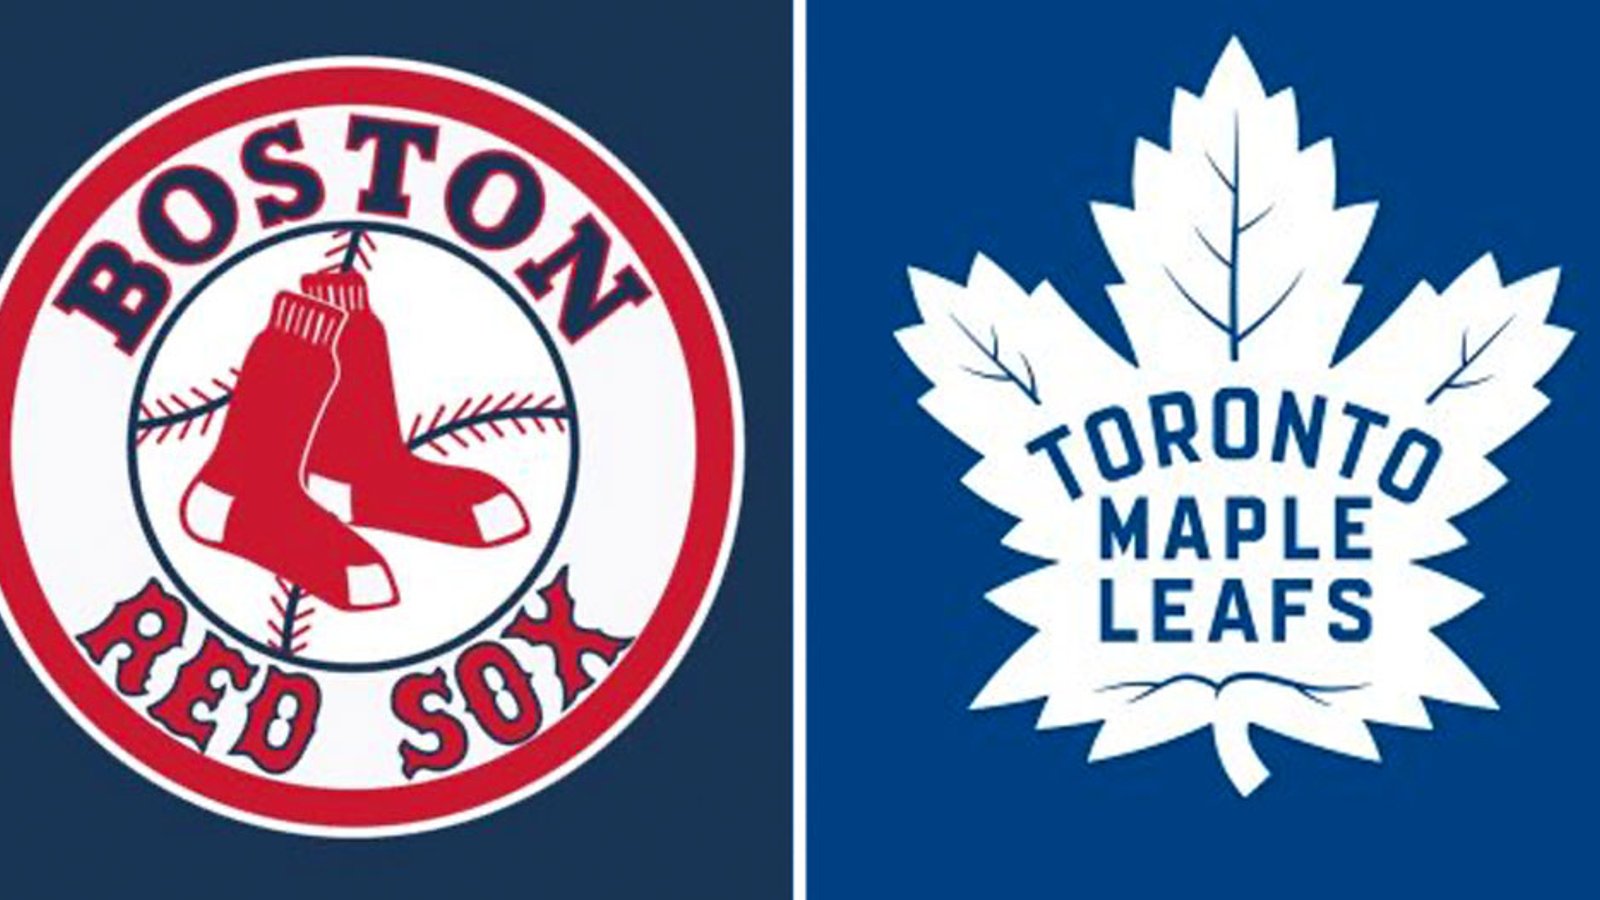 MLB's Boston Red Sox make a pitch to buy the Toronto Maple Leafs